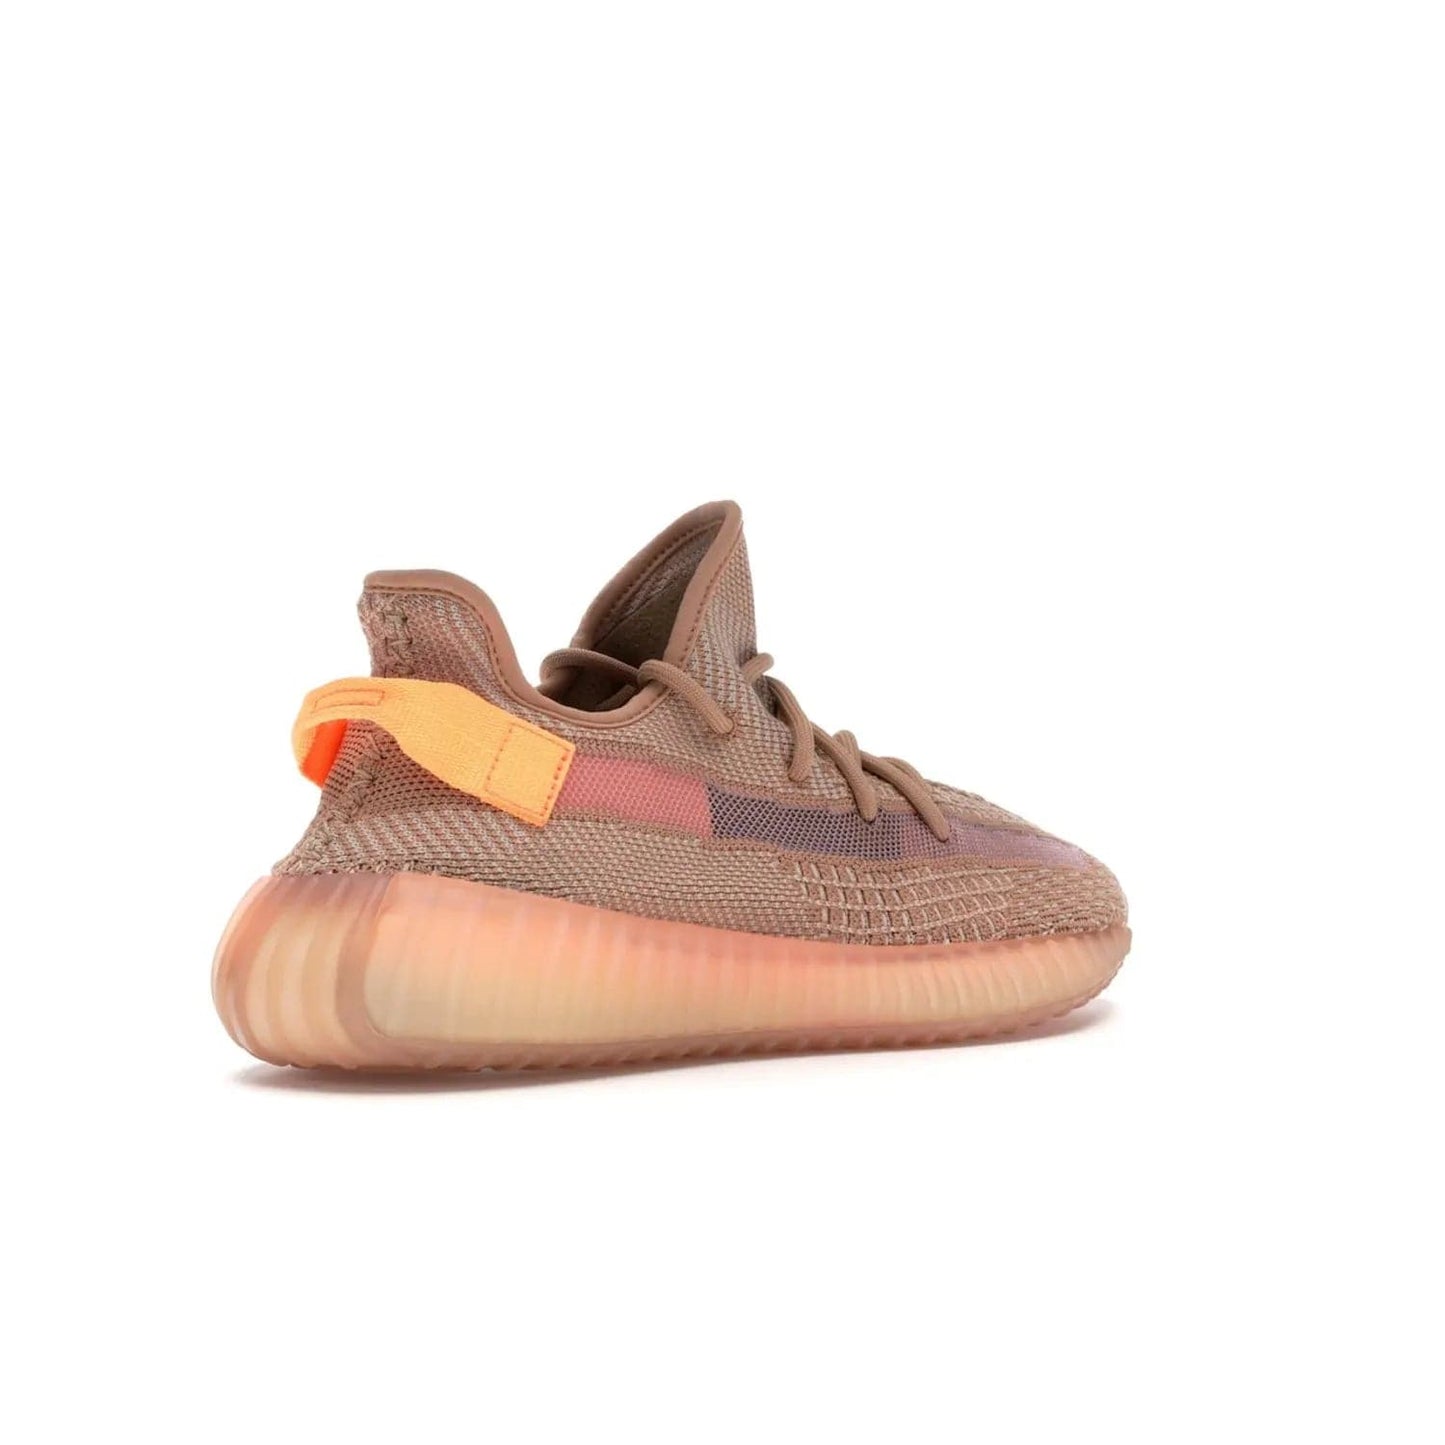 adidas Yeezy Boost 350 V2 Clay - Image 33 - Only at www.BallersClubKickz.com - The adidas Yeezy Boost 350 V2 Clay - style and swag in one shoe. Orange accents, clay midsole and sole. Get yours today!